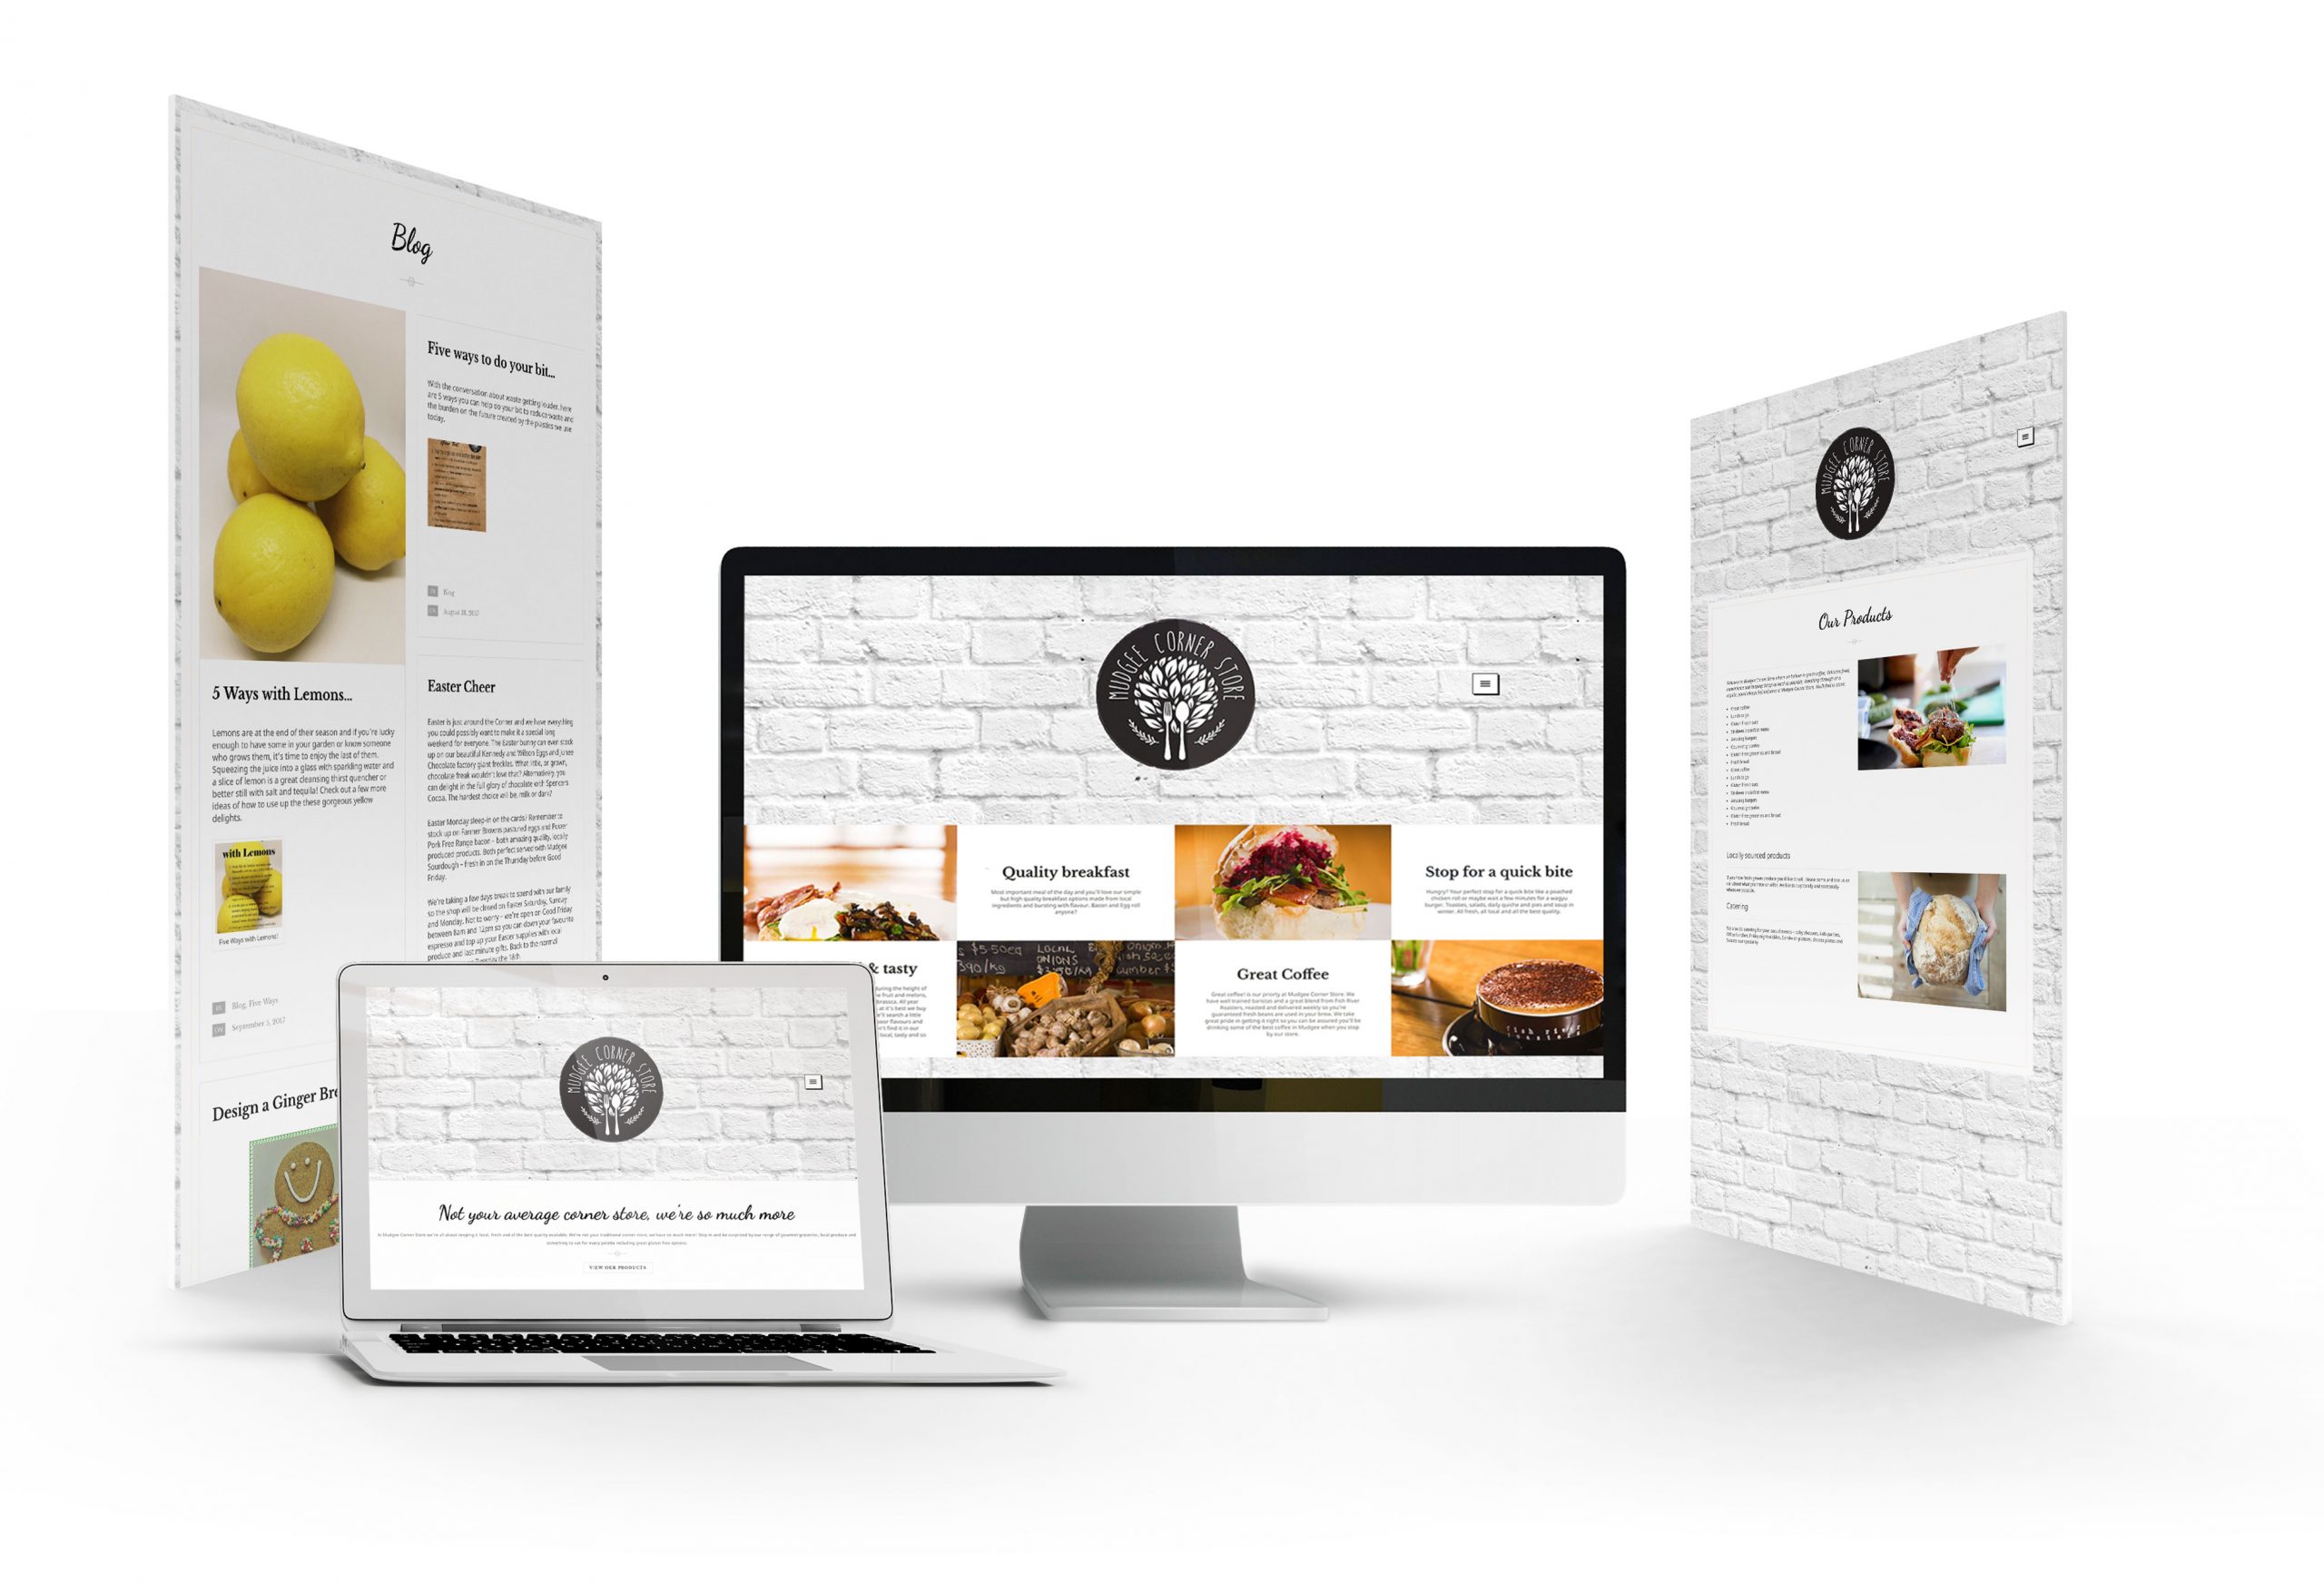 Mudgee Corner Store website on mobile responsive layouts and devices